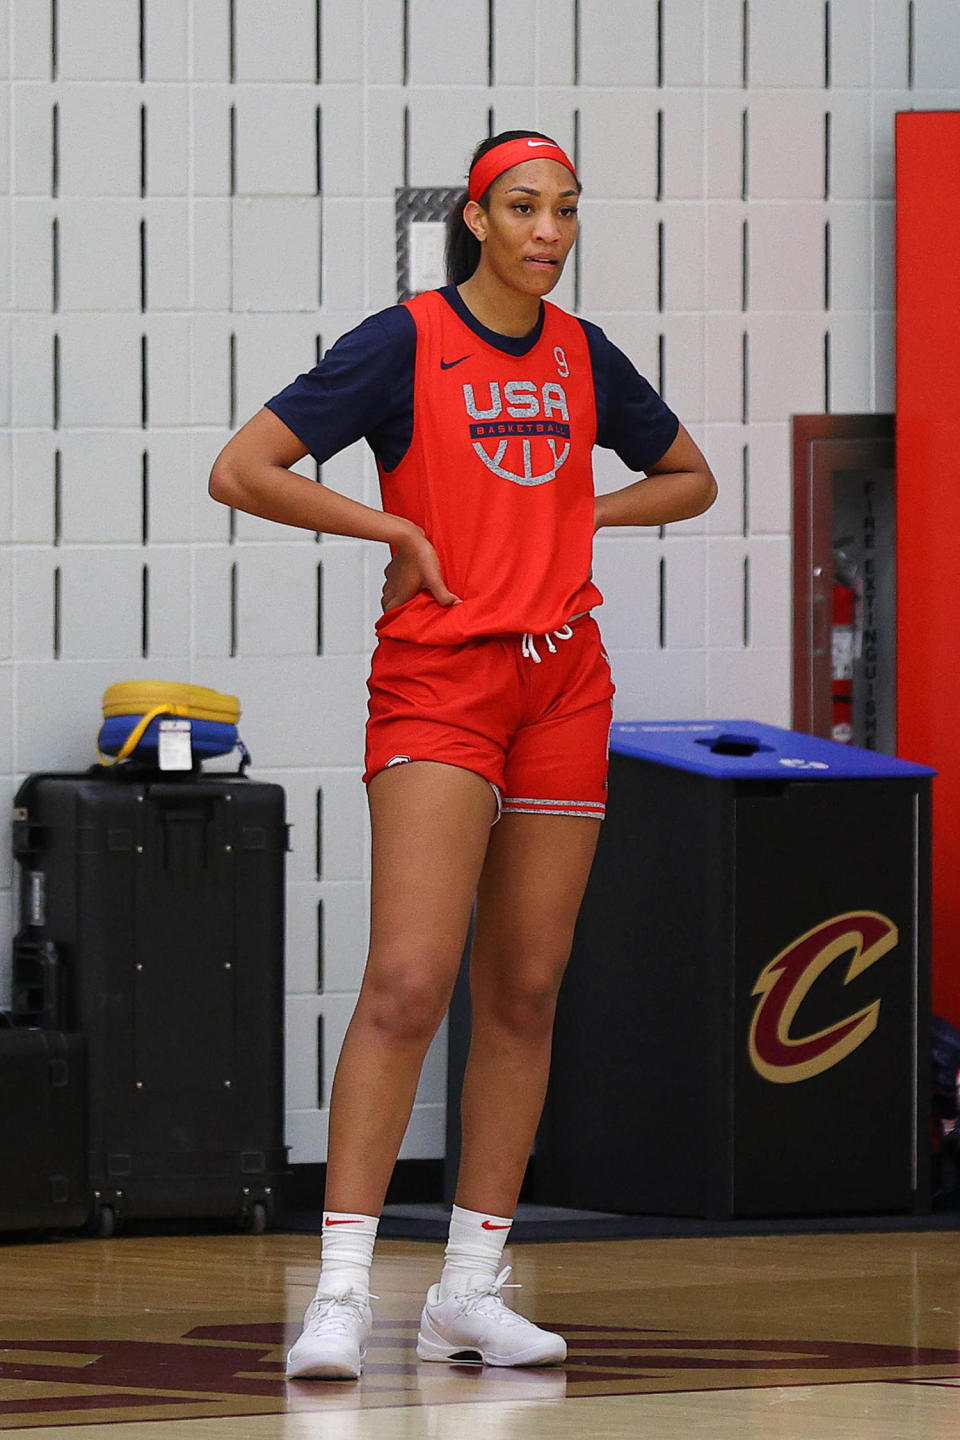 USA Basketball - Women's National Team Training Camp (Mike Lawrie / Getty Images)